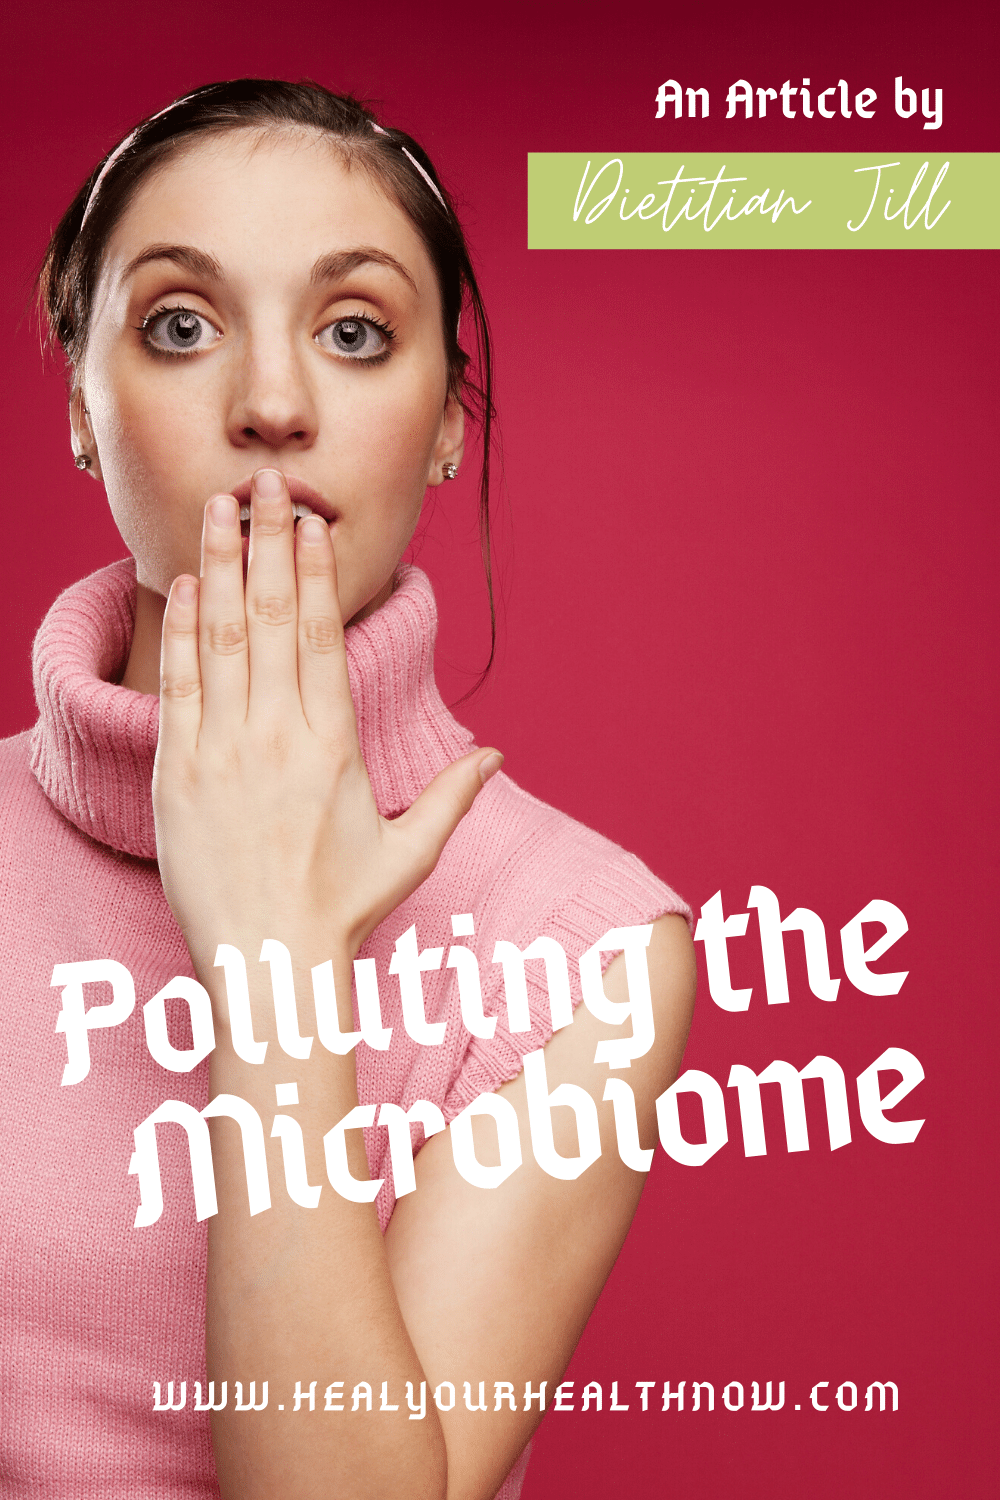 Polluting the Microbiome